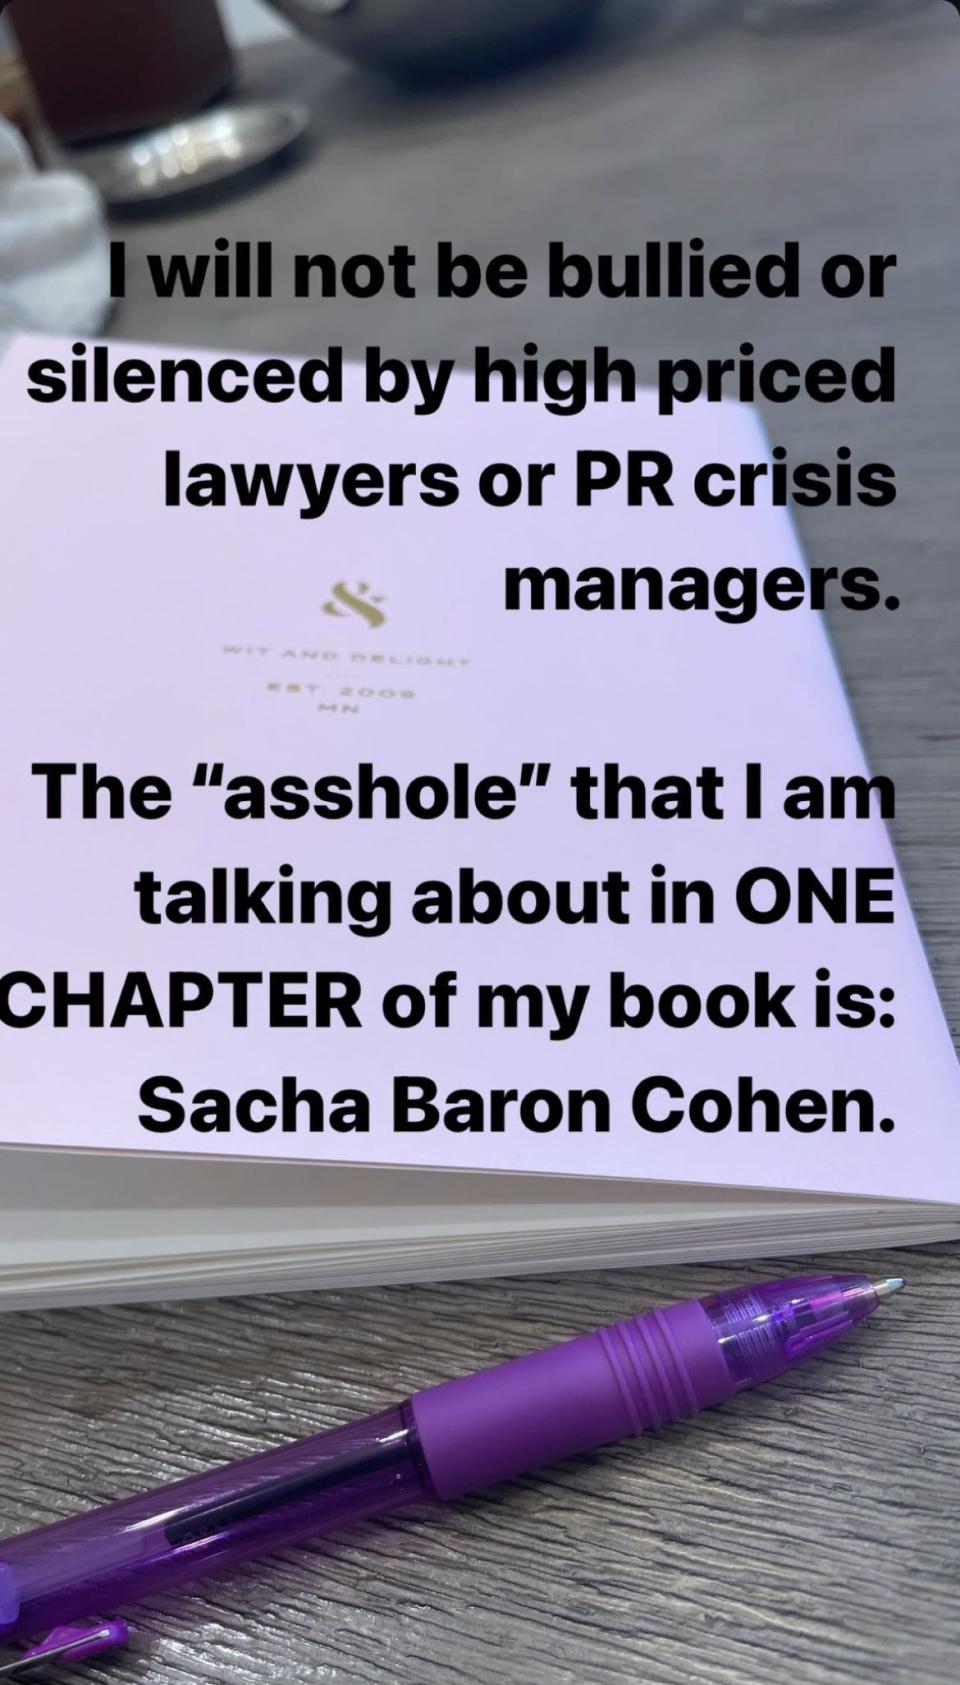 A screenshot of Rebel Wilson's Instagram story which names Sacha Baron Cohen.